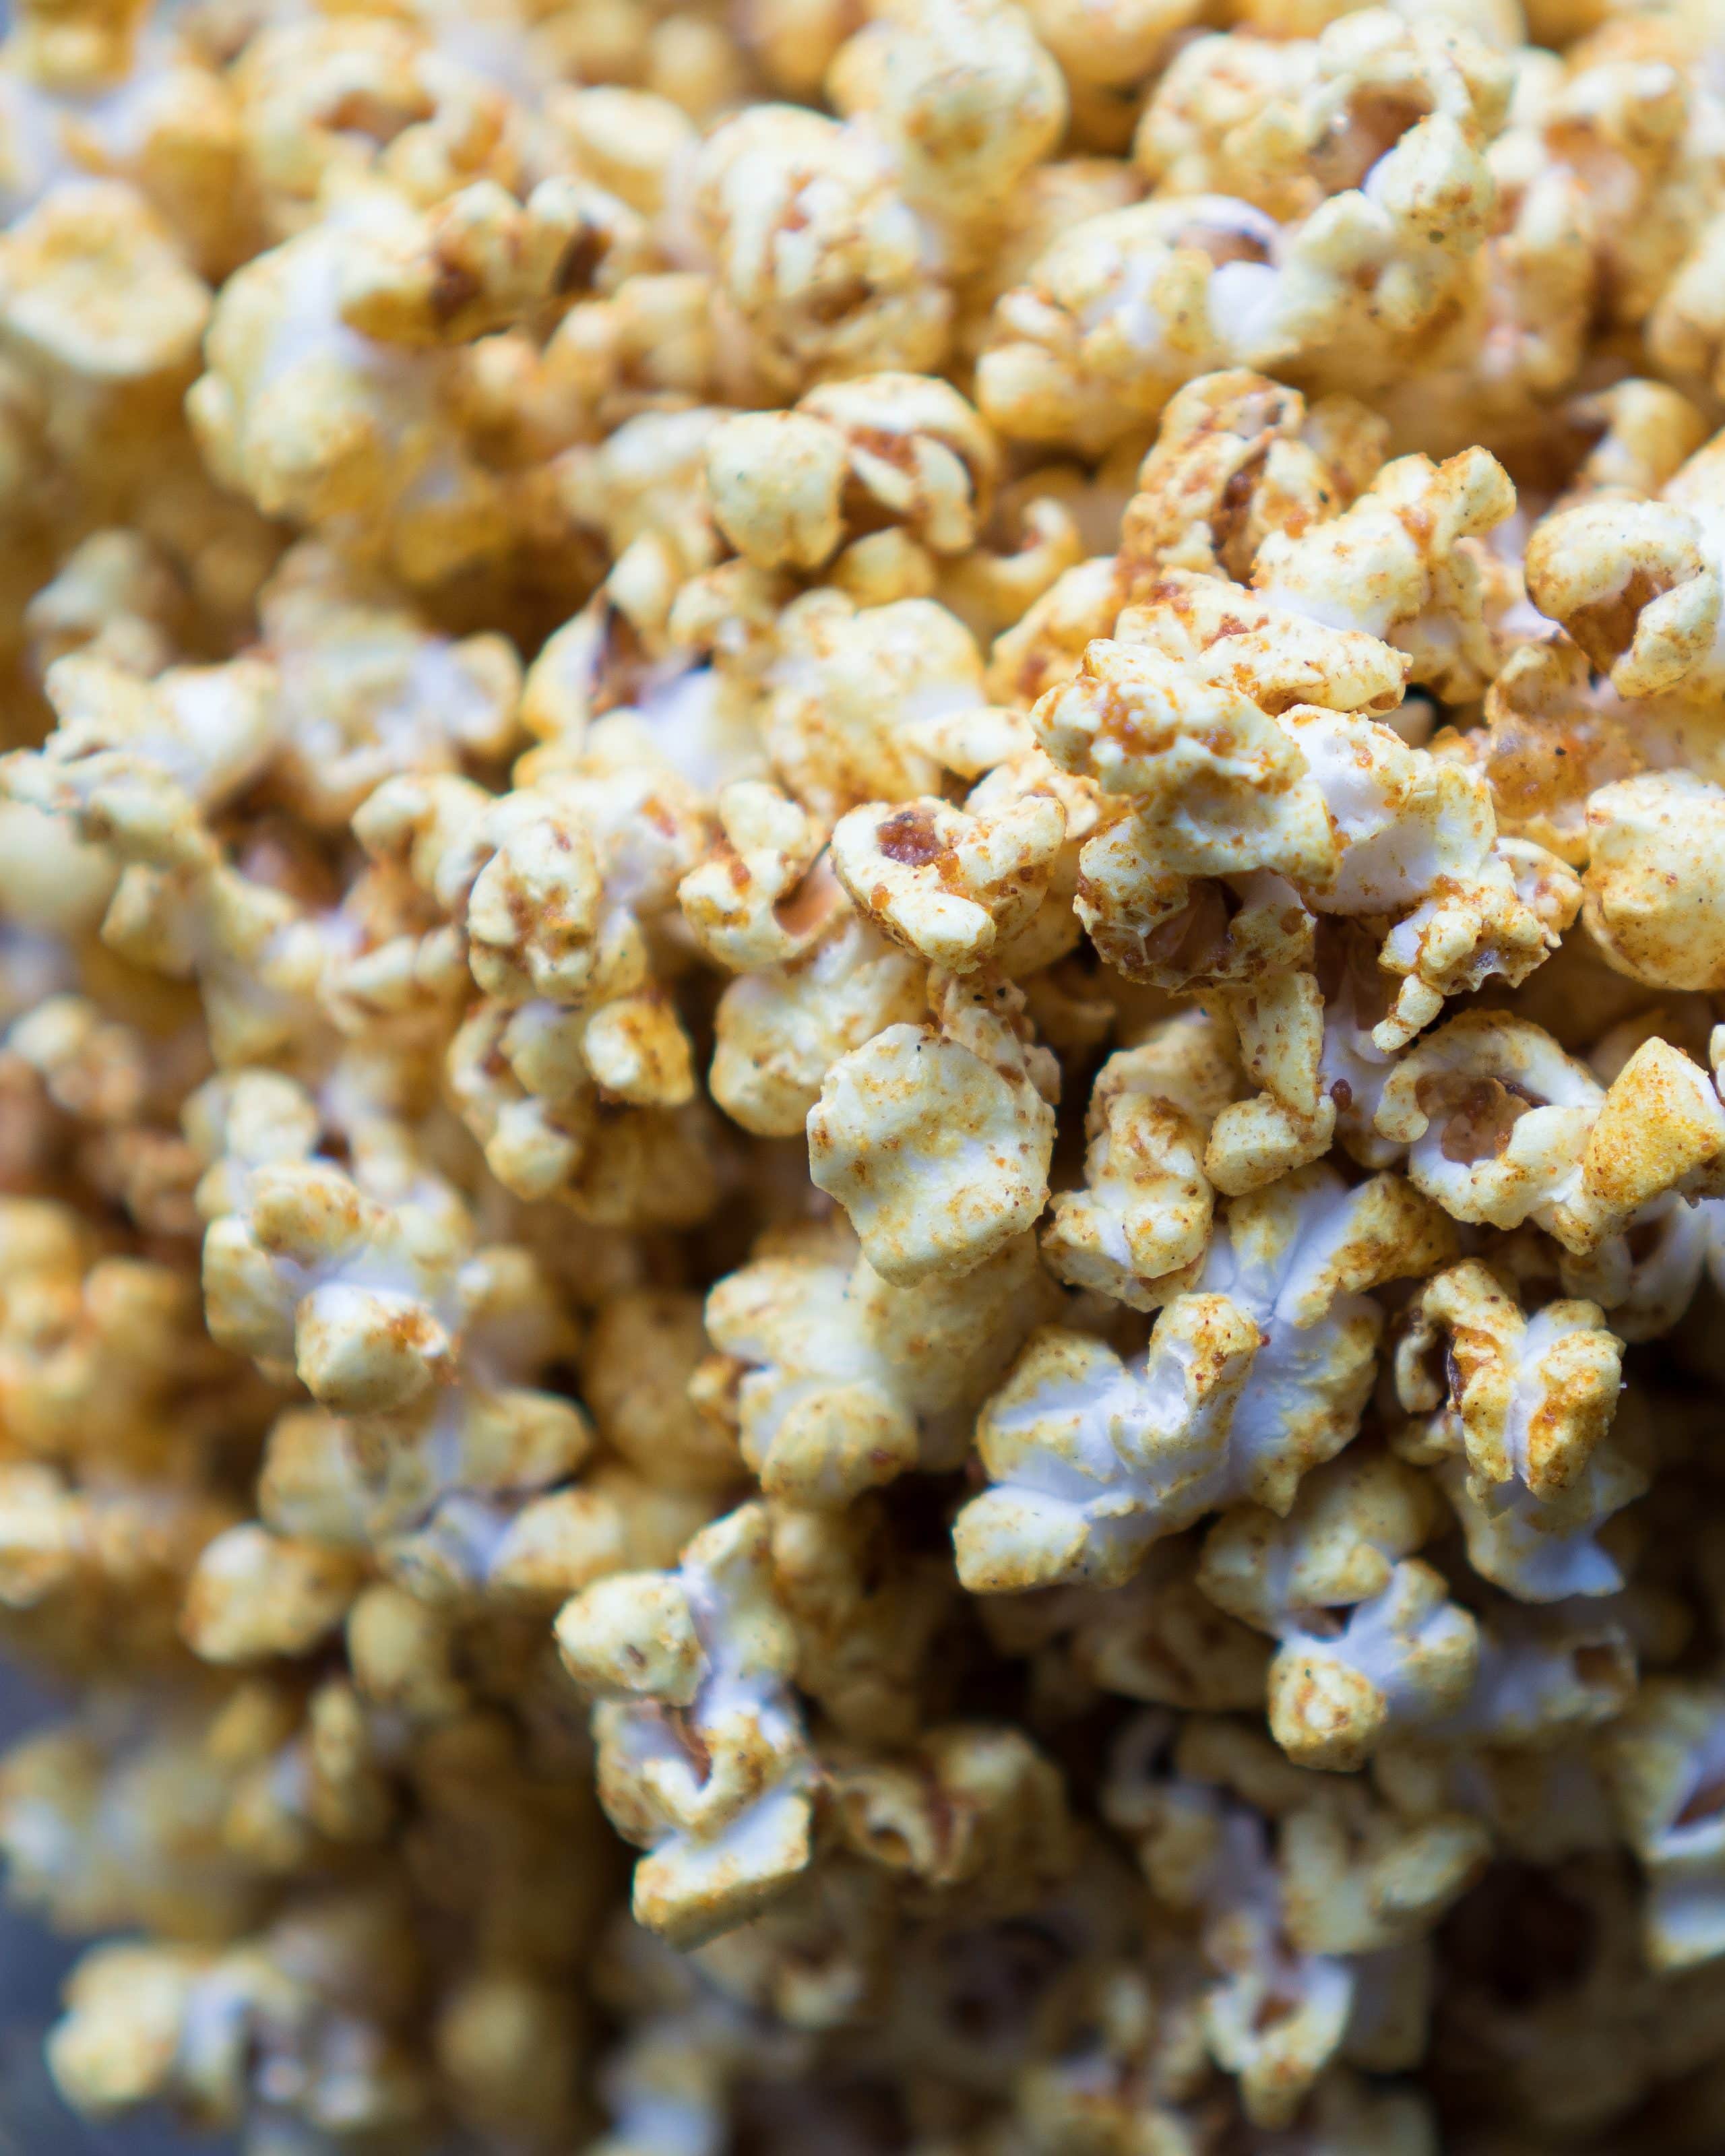 Sweet and Salty Curry Popcorn – Easy recipe for homemade Sweet and Salty Curry Popcorn. This gluten-free, vegan-friendly popcorn is spiced with curry powder, garlic powder, cinnamon, coconut sugar, and cayenne! Popped in coconut oil for a dose of healthy fats, this is perfect for at home movie nights or afternoon snacking! ♥ | freeyourfork.com